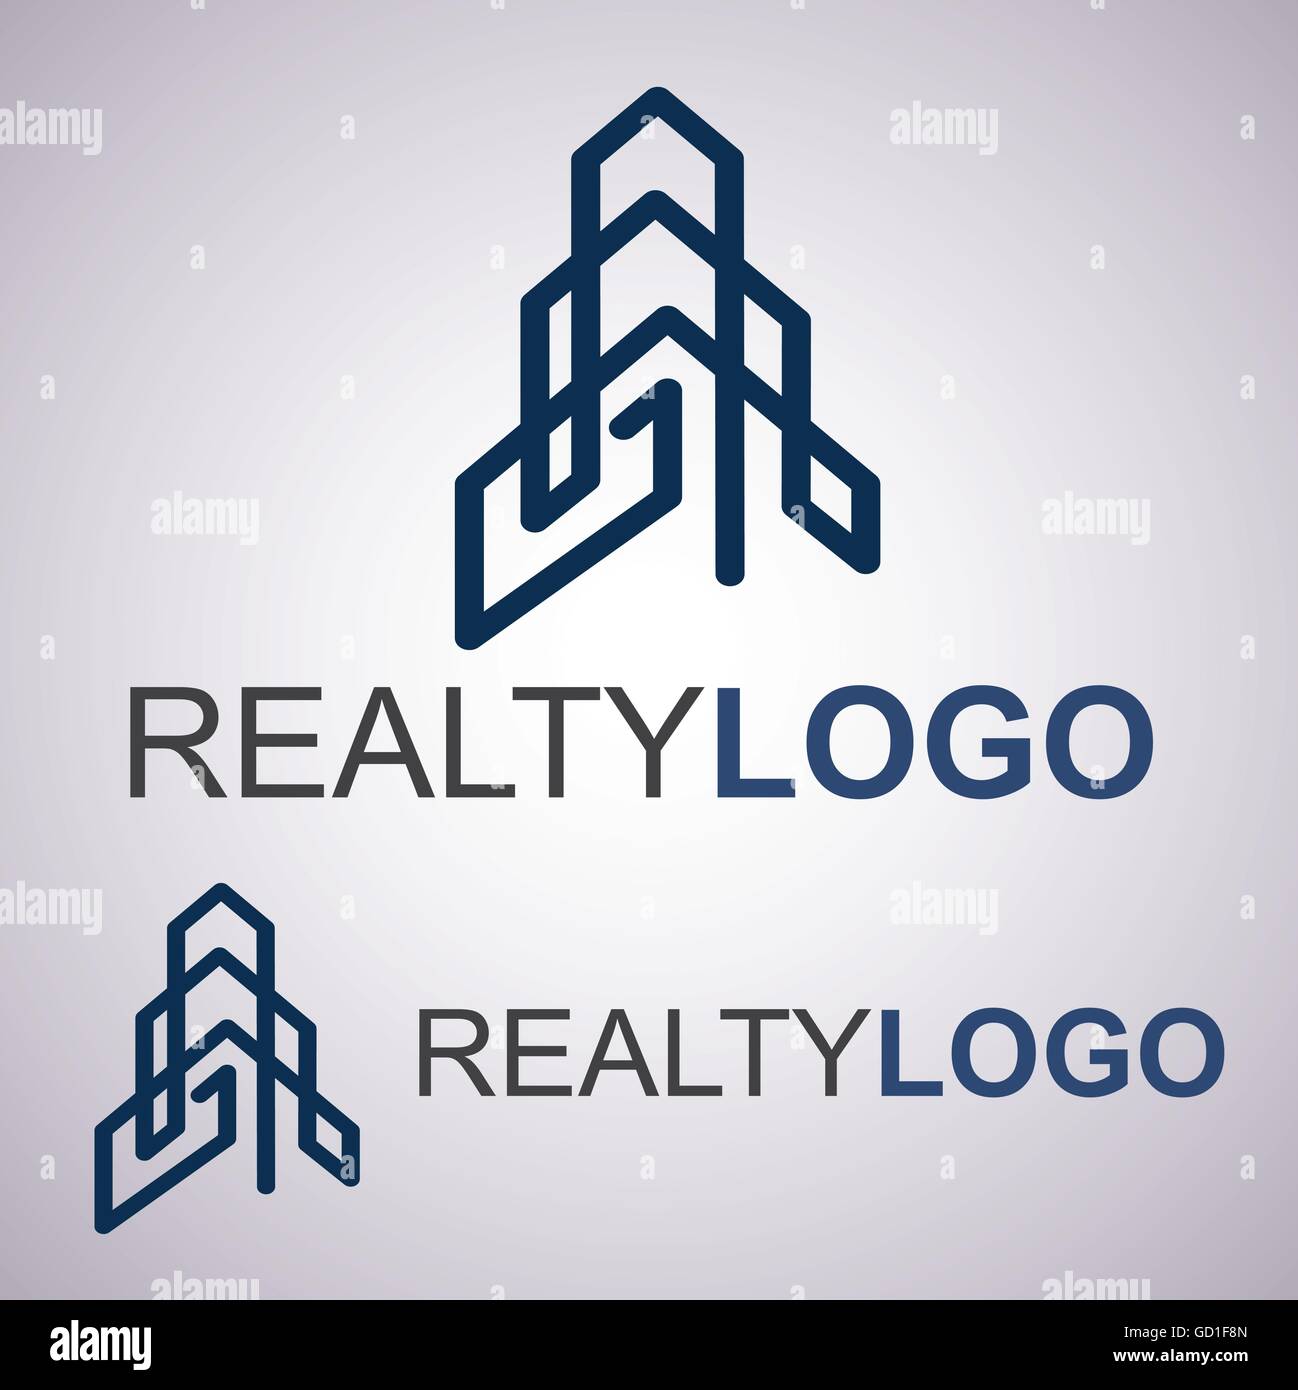 realty logo designed in a simple way so it can be use for multiple proposes like logo ,mark ,symbol or icon. Stock Vector